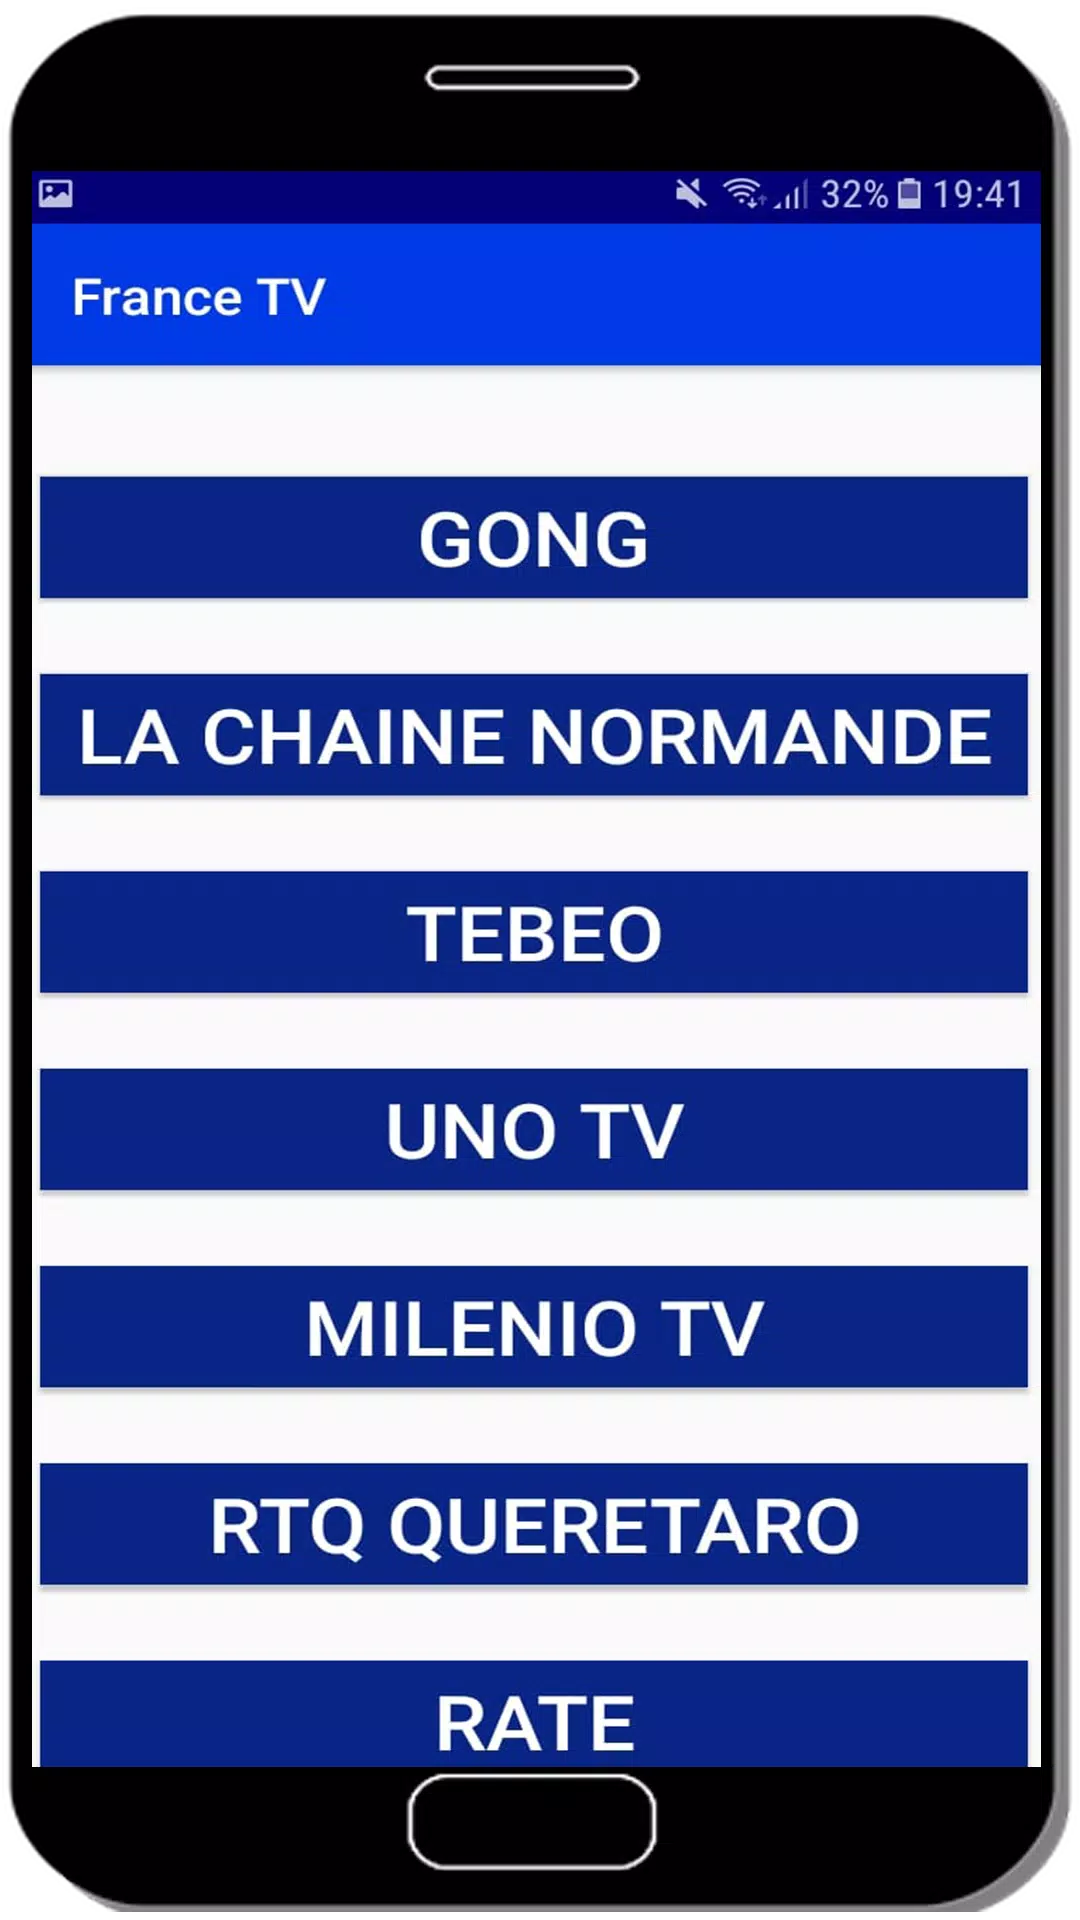 France TV Live for Android - APK Download